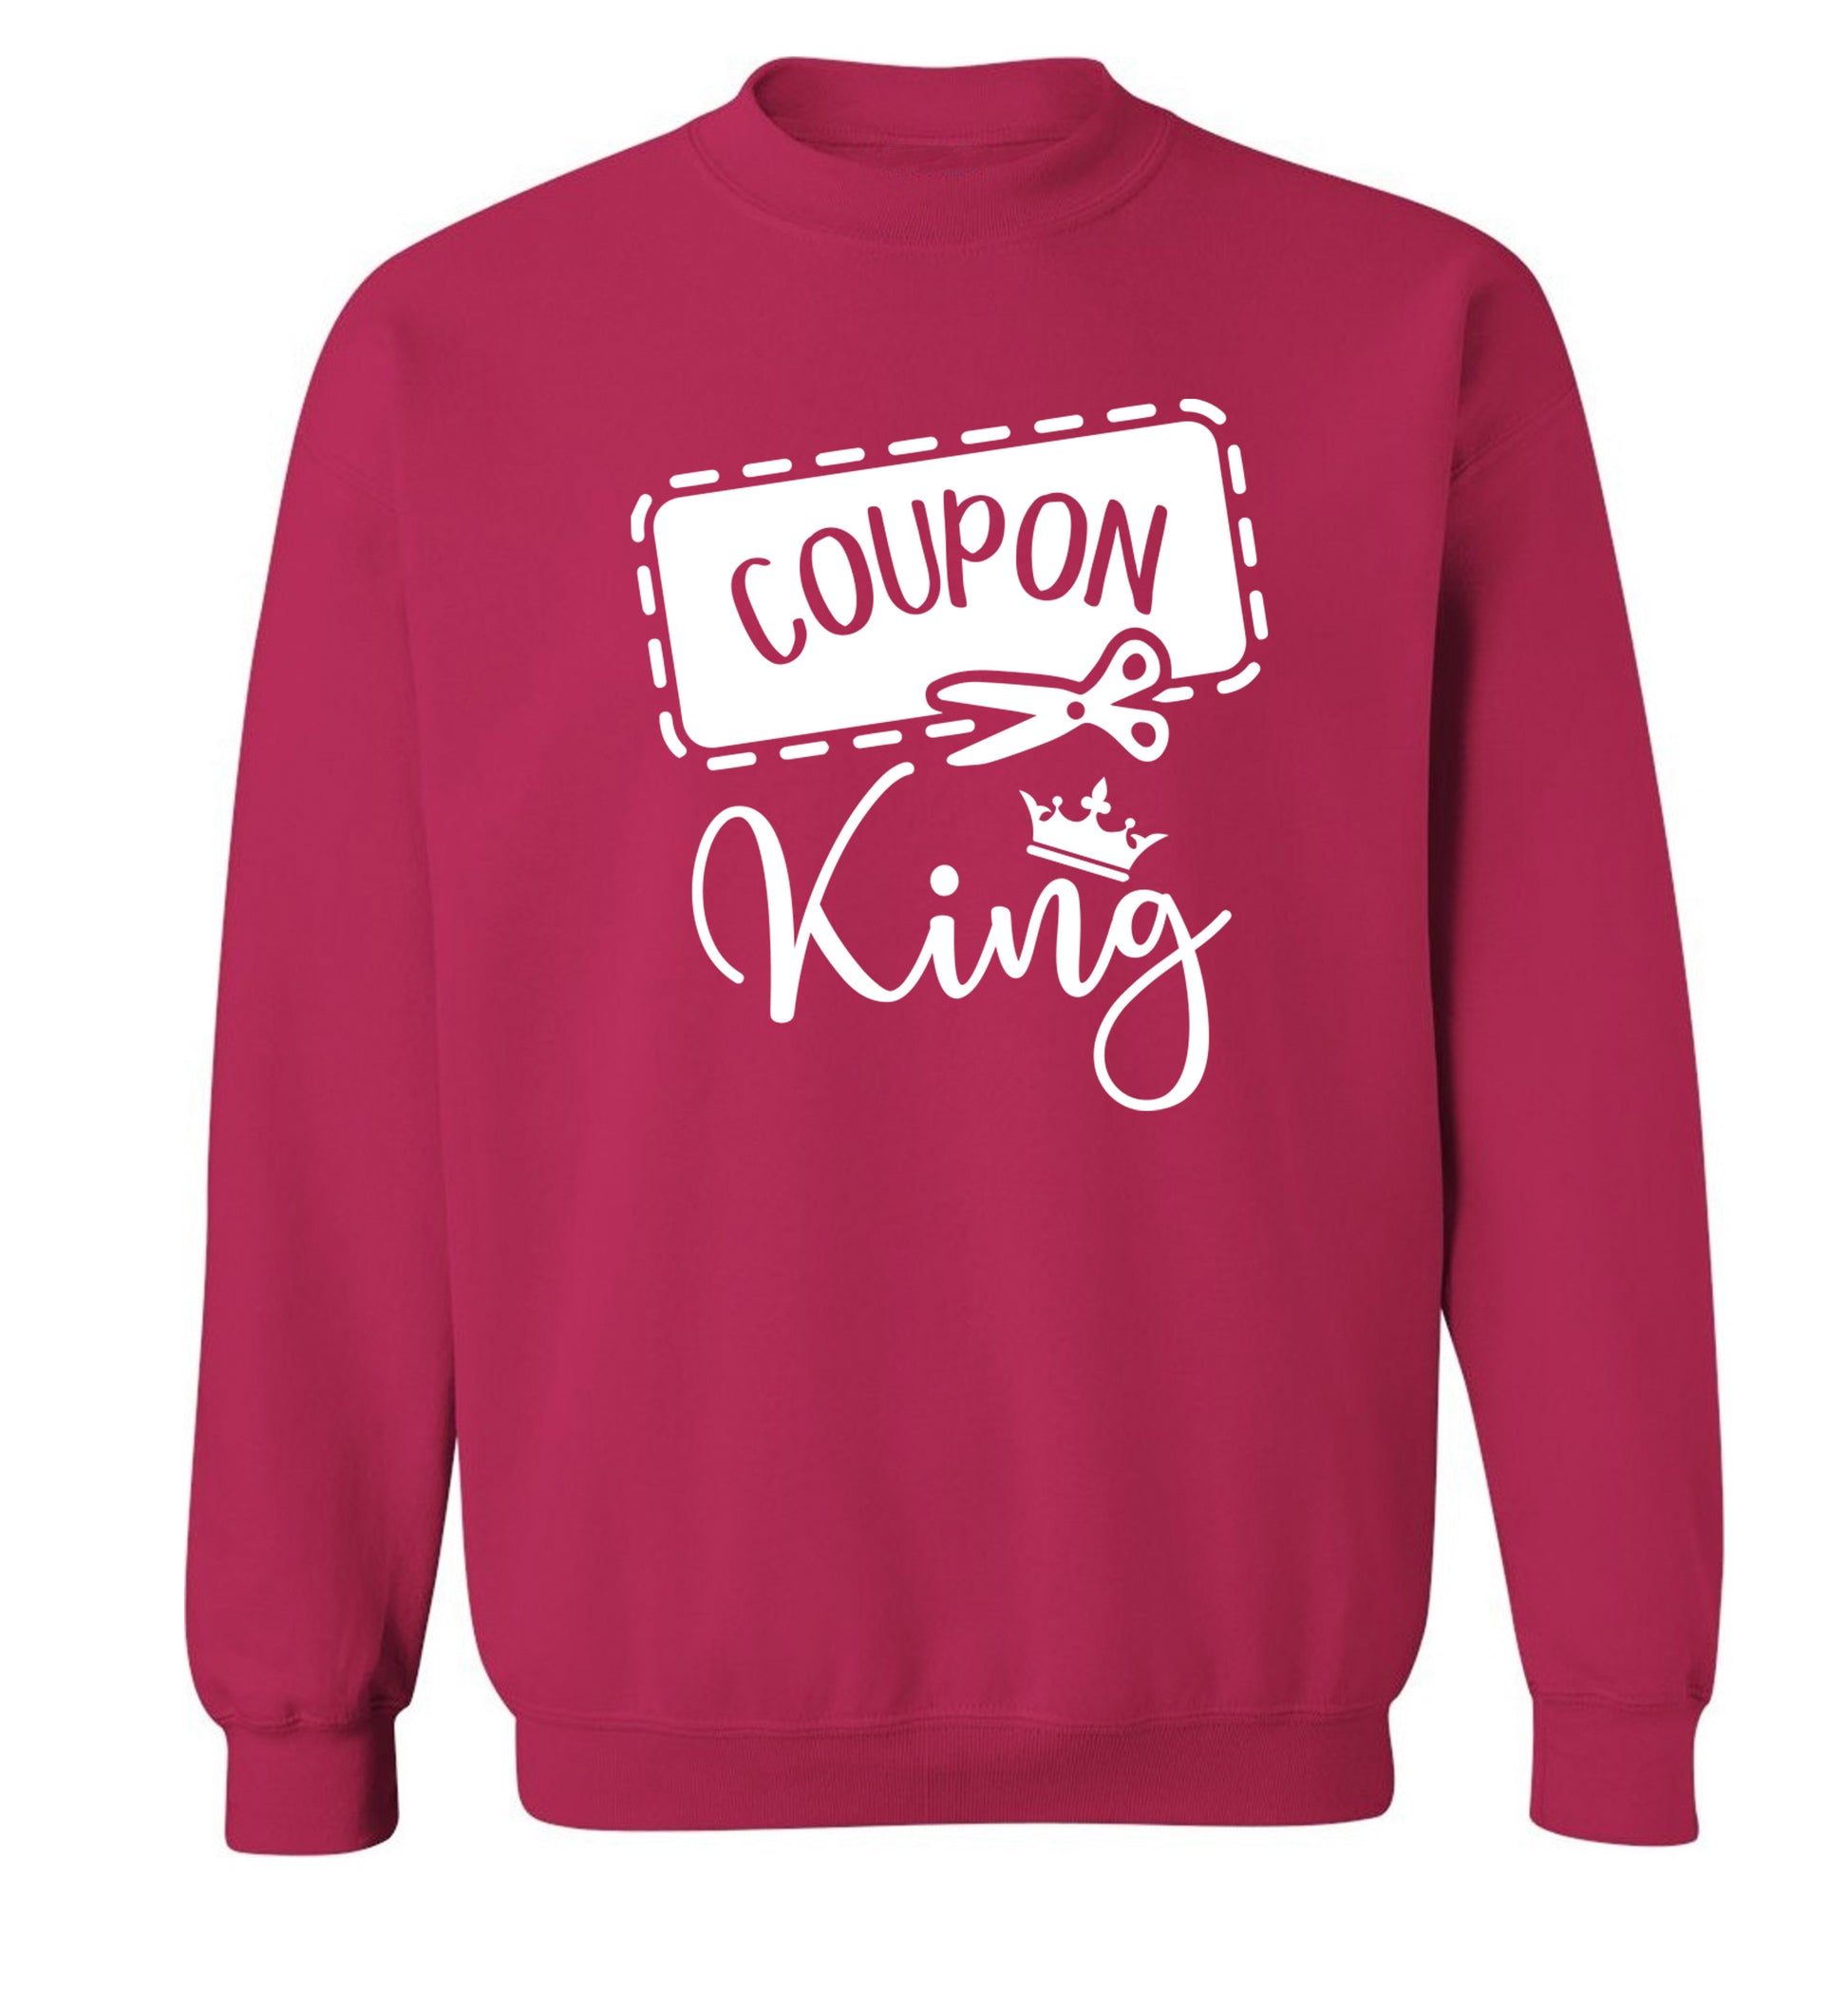 Coupon King Adult's unisex pink Sweater 2XL